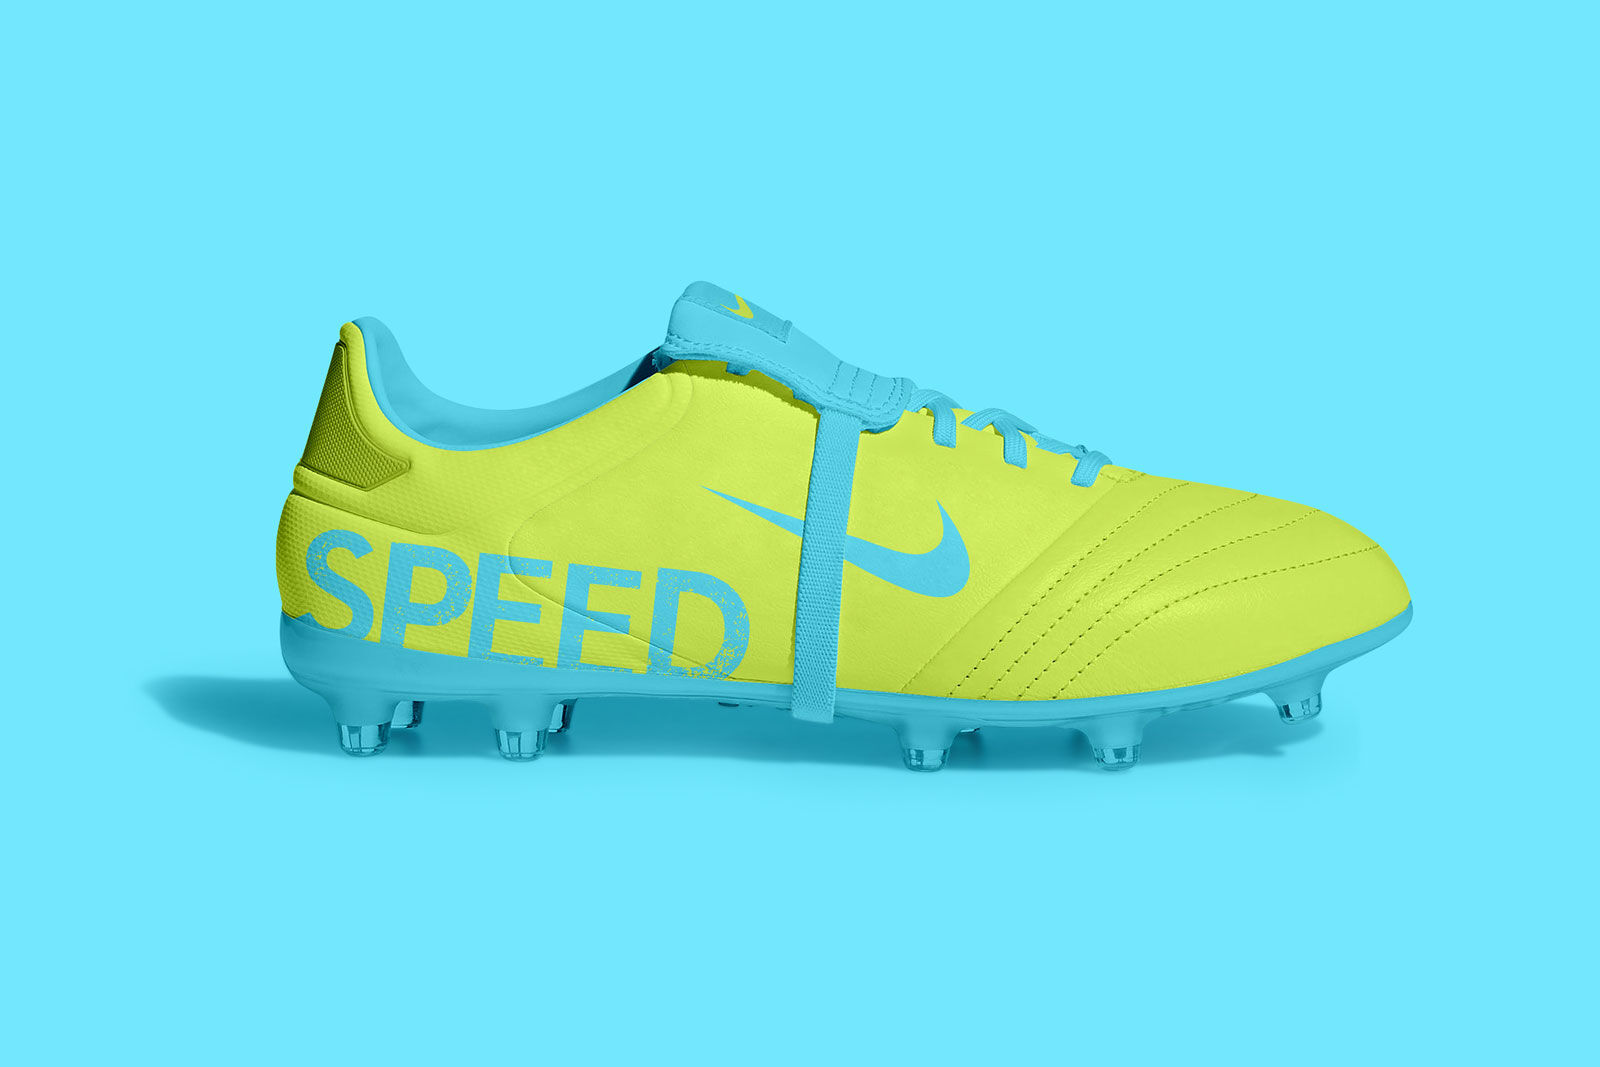 Soccer Cleat Shoes Side View Mockup FREE PSD